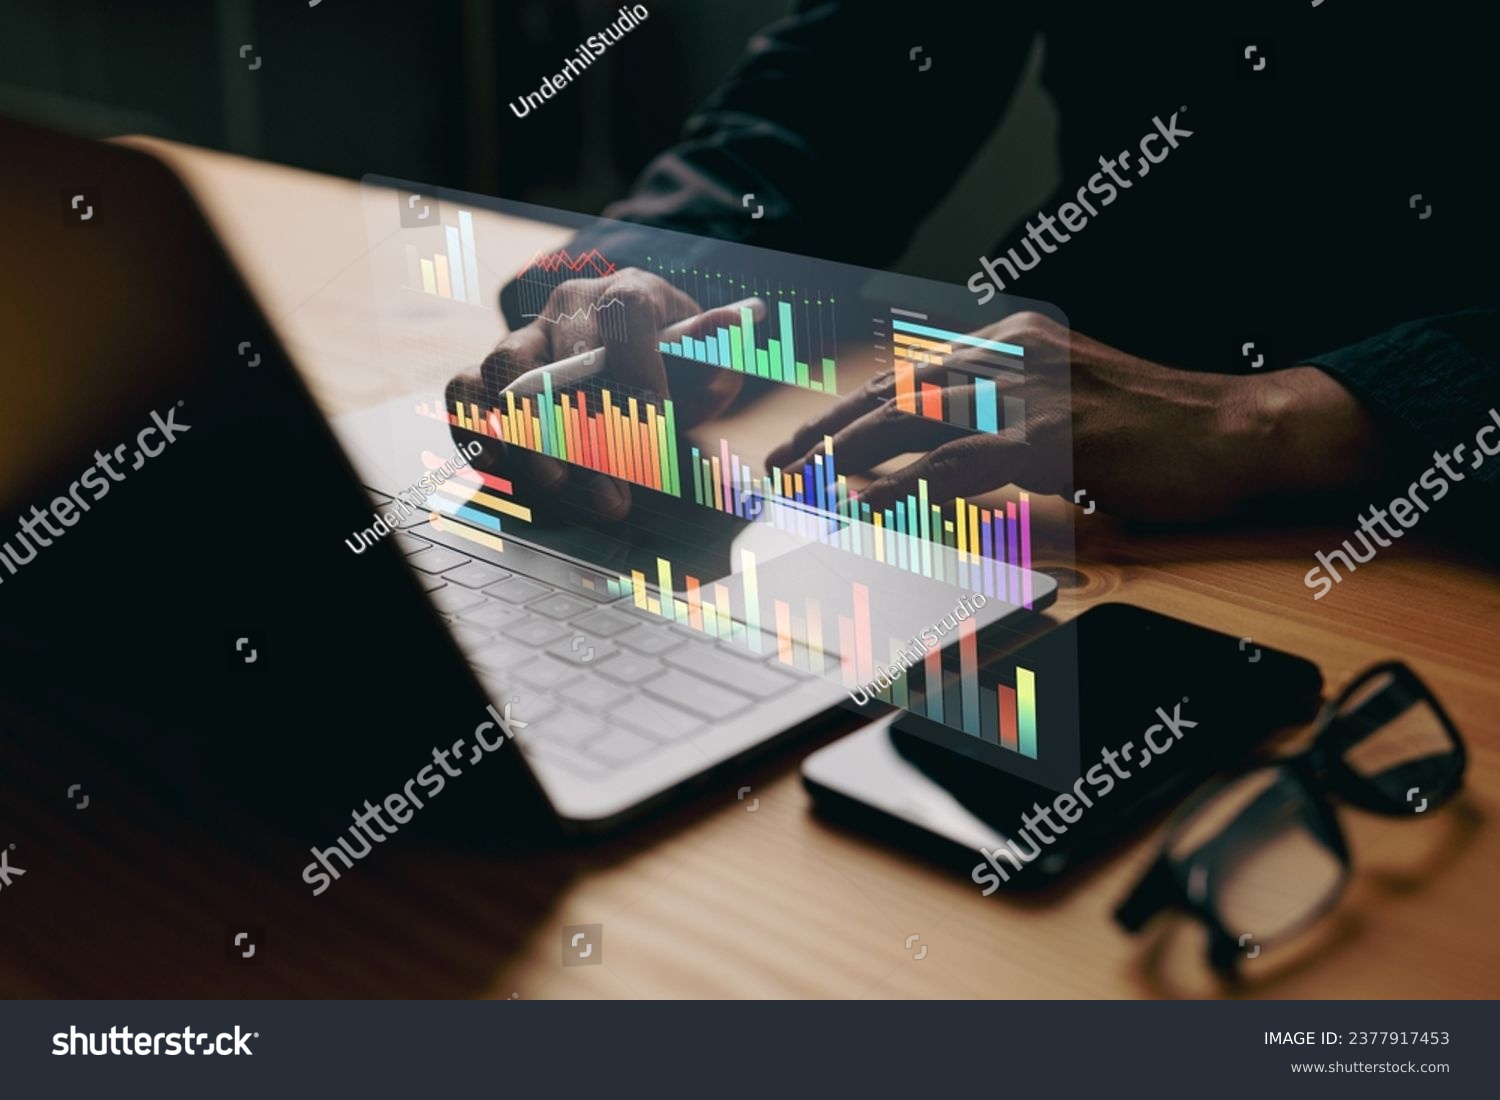 Effective data visualization can greatly enhance the understanding of financial data. Many professionals in finance use benchmarking as a tool to gauge their performance against industry standards. #2377917453